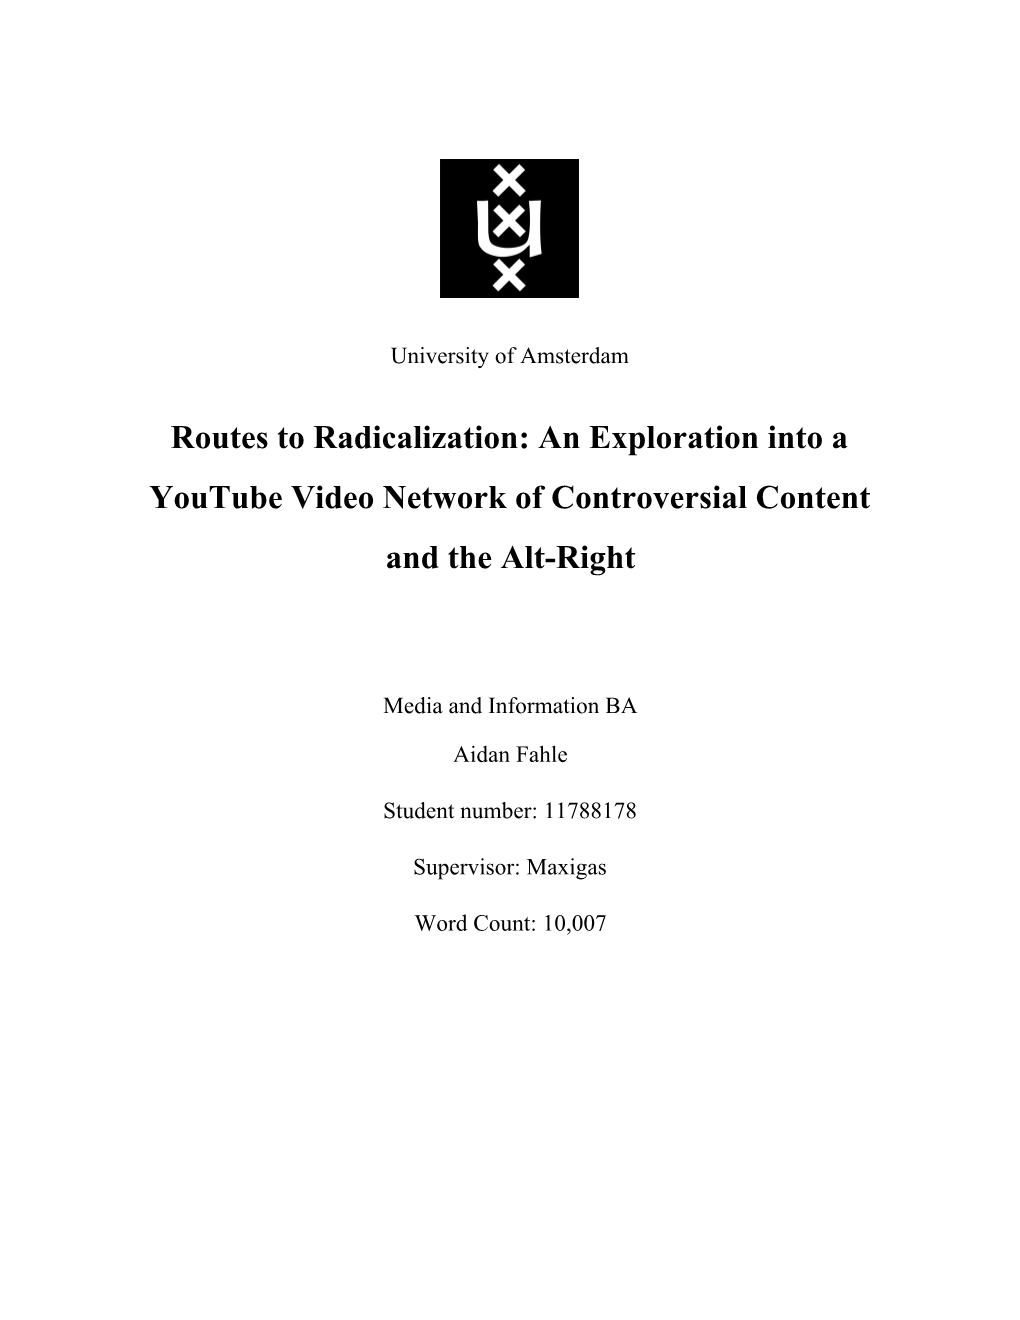 Routes to Radicalization: an Exploration Into a Youtube Video Network of Controversial Content and the Alt-Right